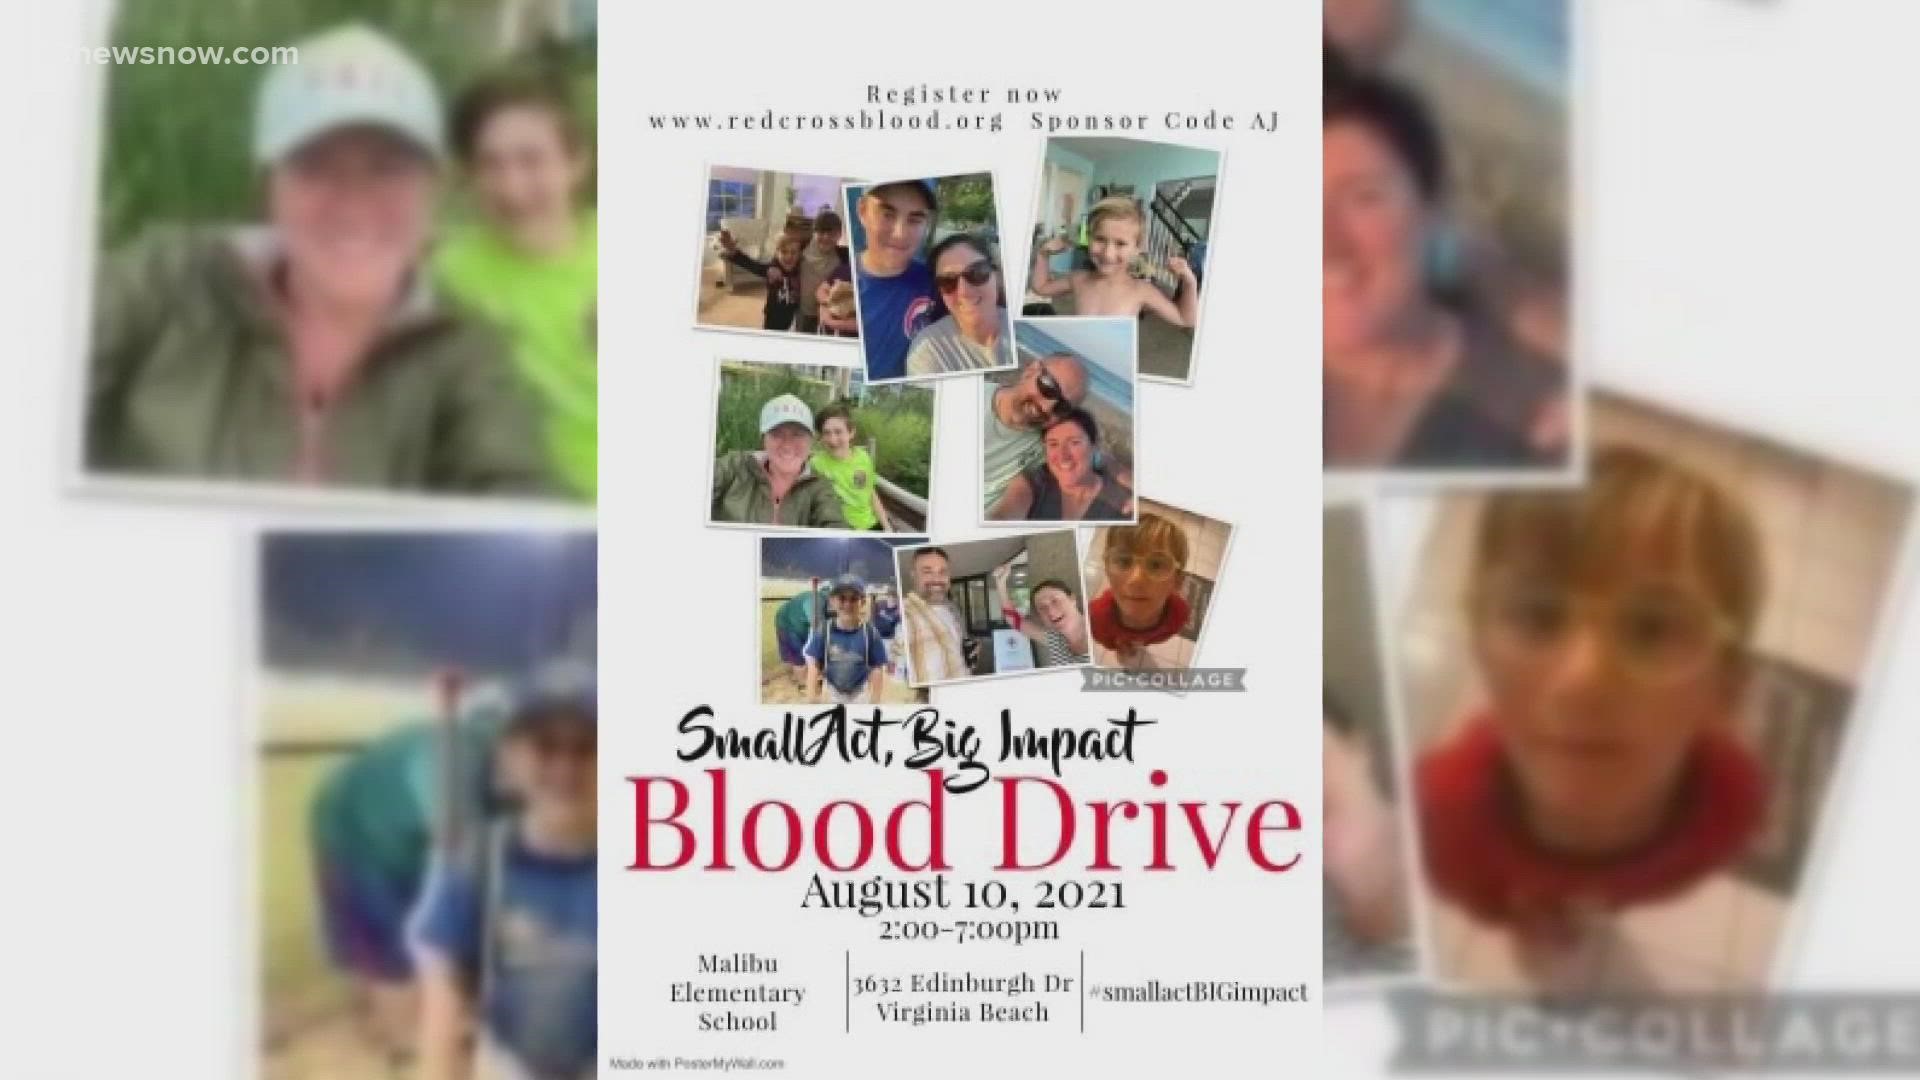 Katie Niehoff was diagnosed with placenta accreta six years ago, during her last pregnancy. Her mission is to save the lives of others through blood donations.